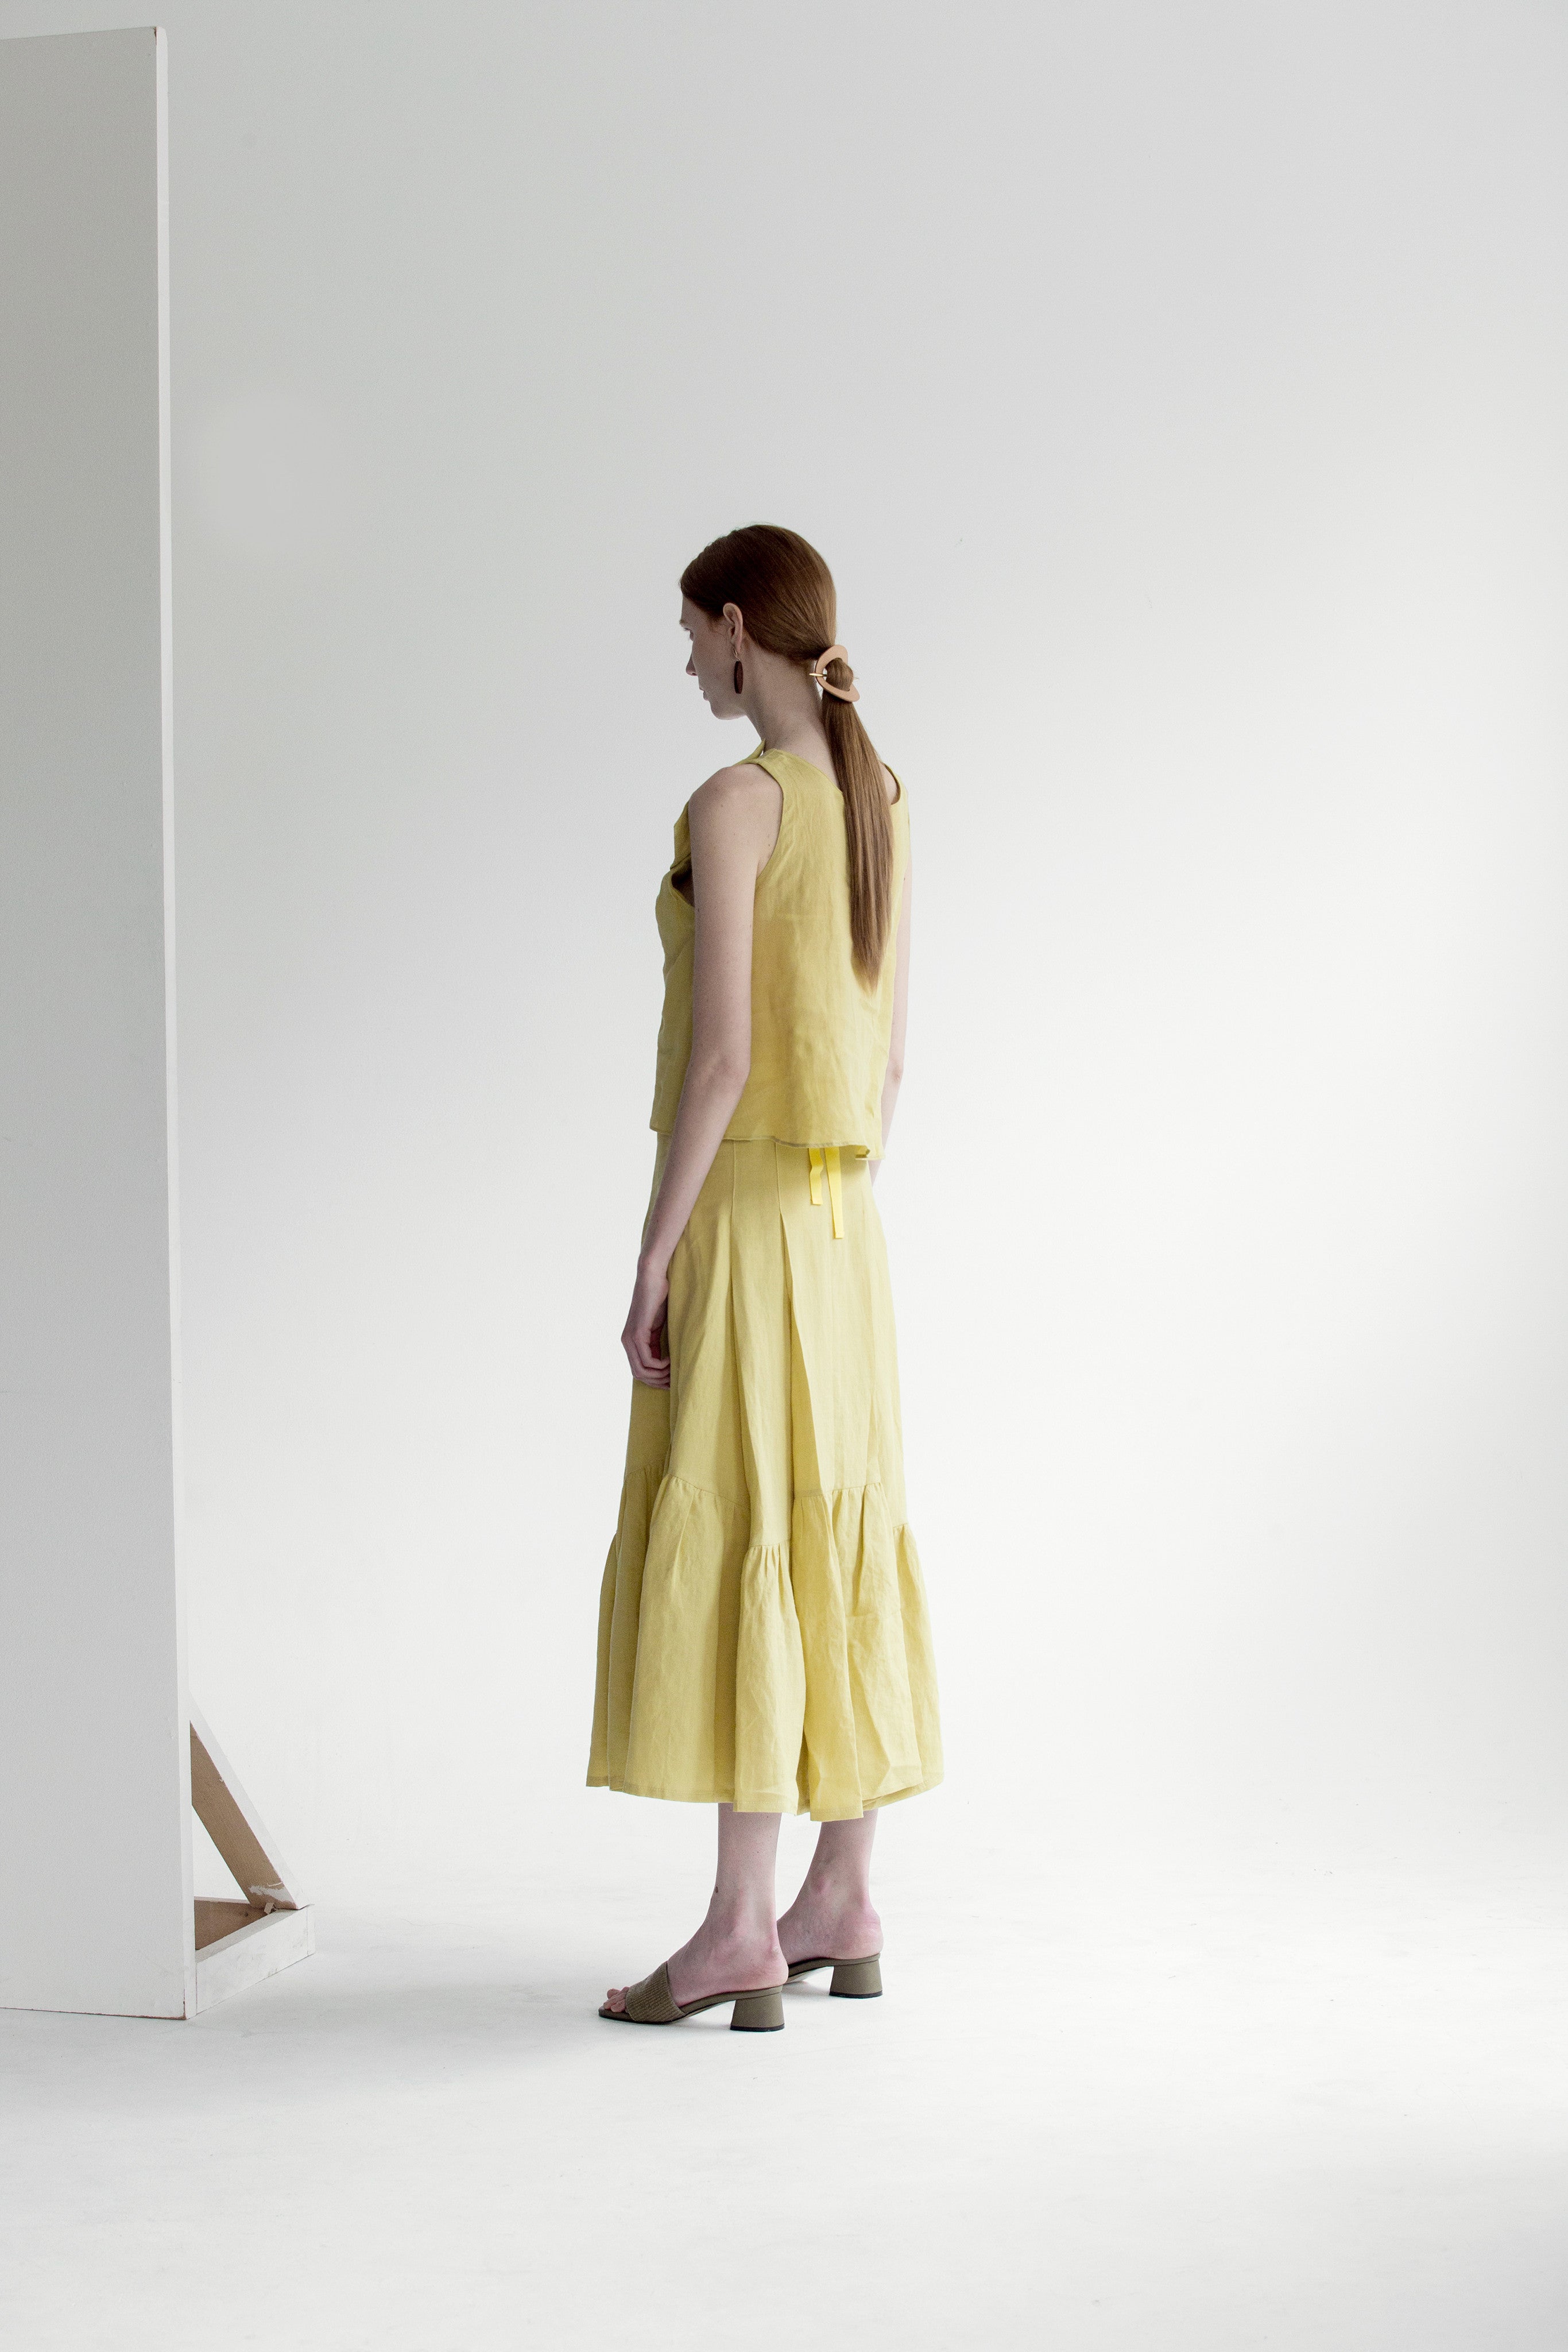 The Dhara Top in Chartreuse featuring sleeveless, V-neckline, front tuck detailing. Pull on.